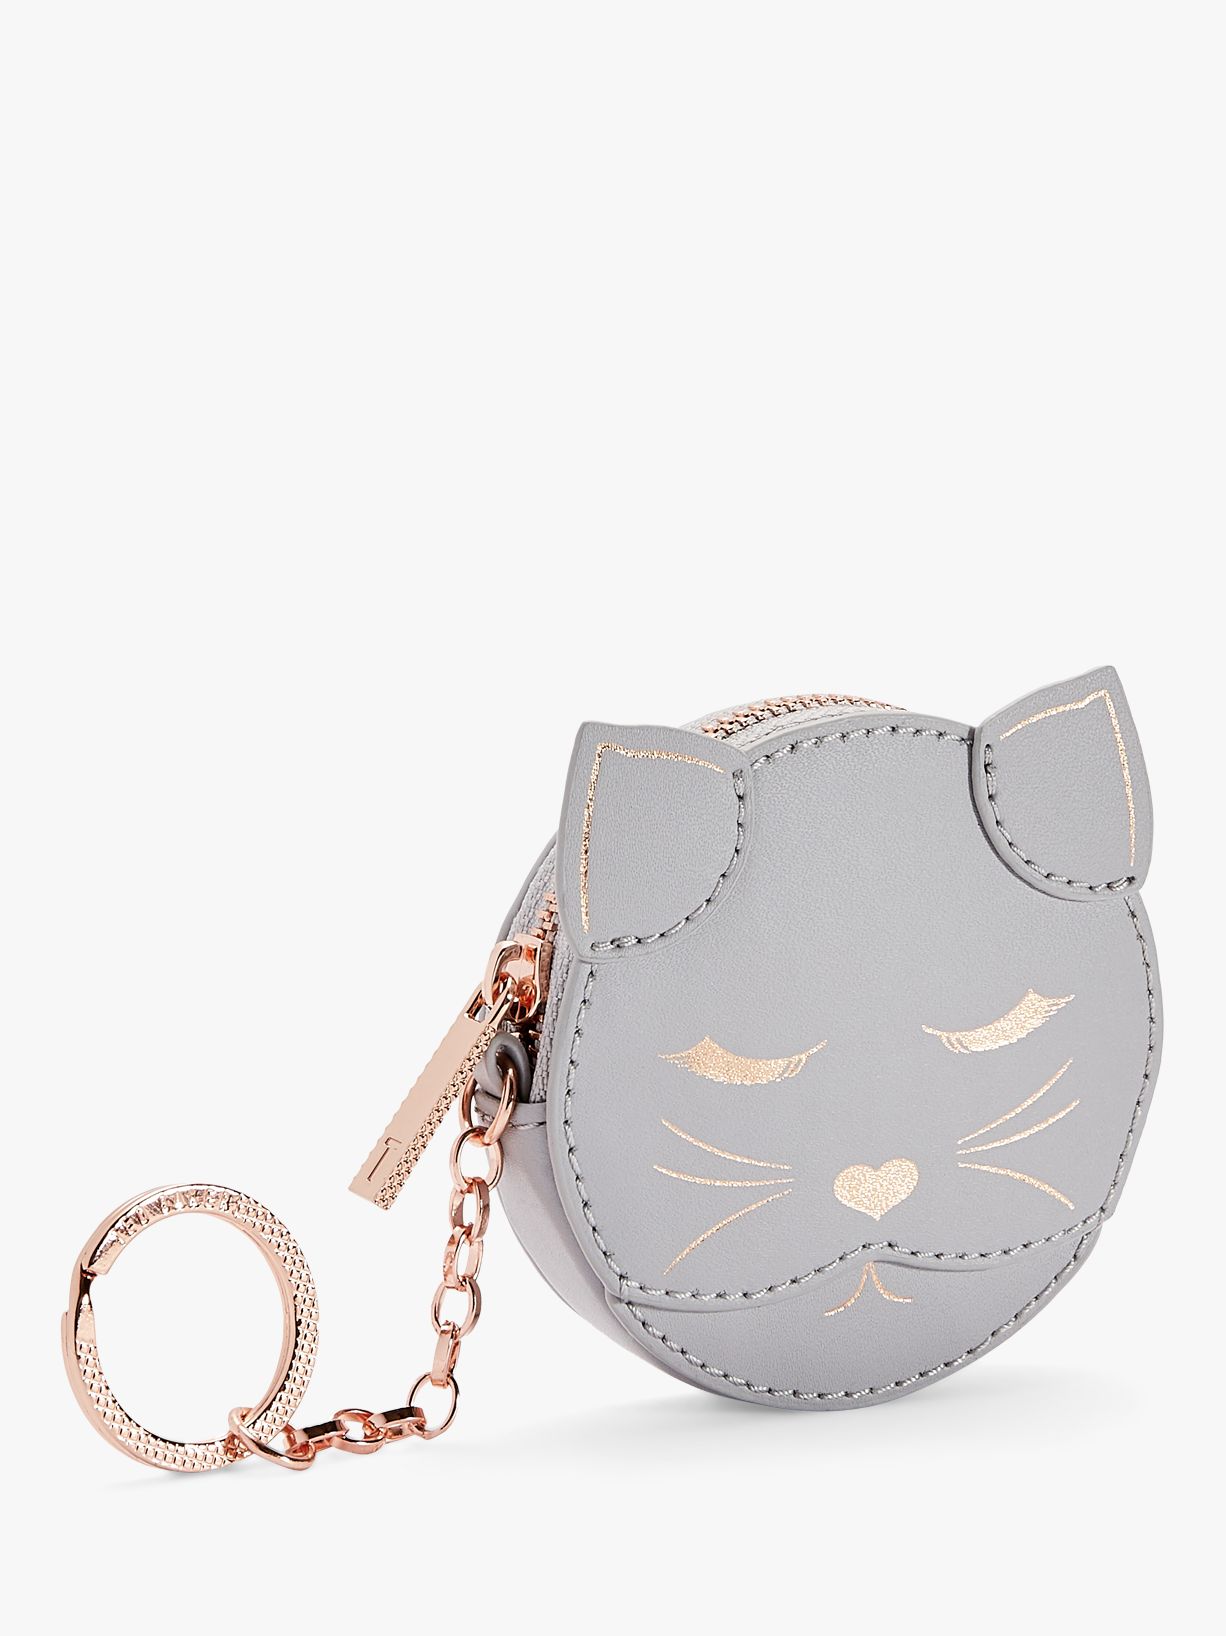 Ted Baker Tabbiee Leather Cat Bag Charm Purse